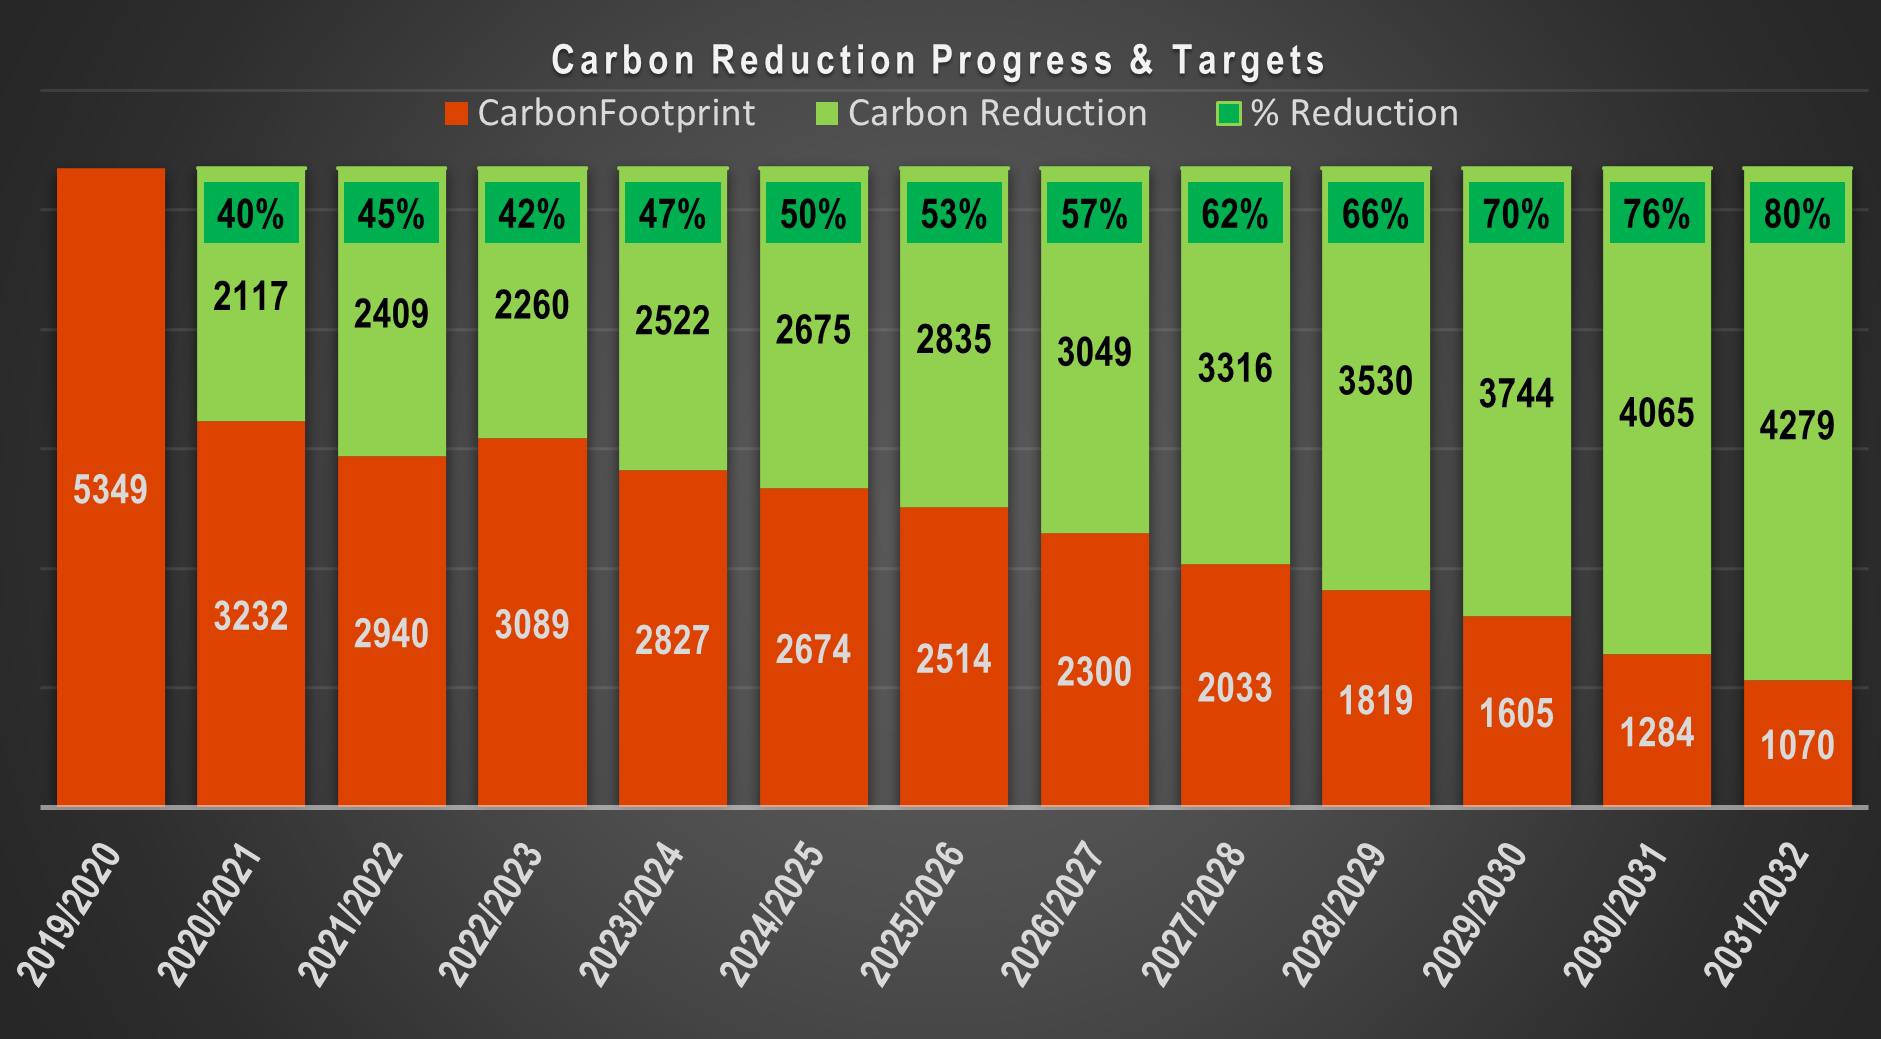 carbon_reduction_progress_and_targets_bar_chart.png